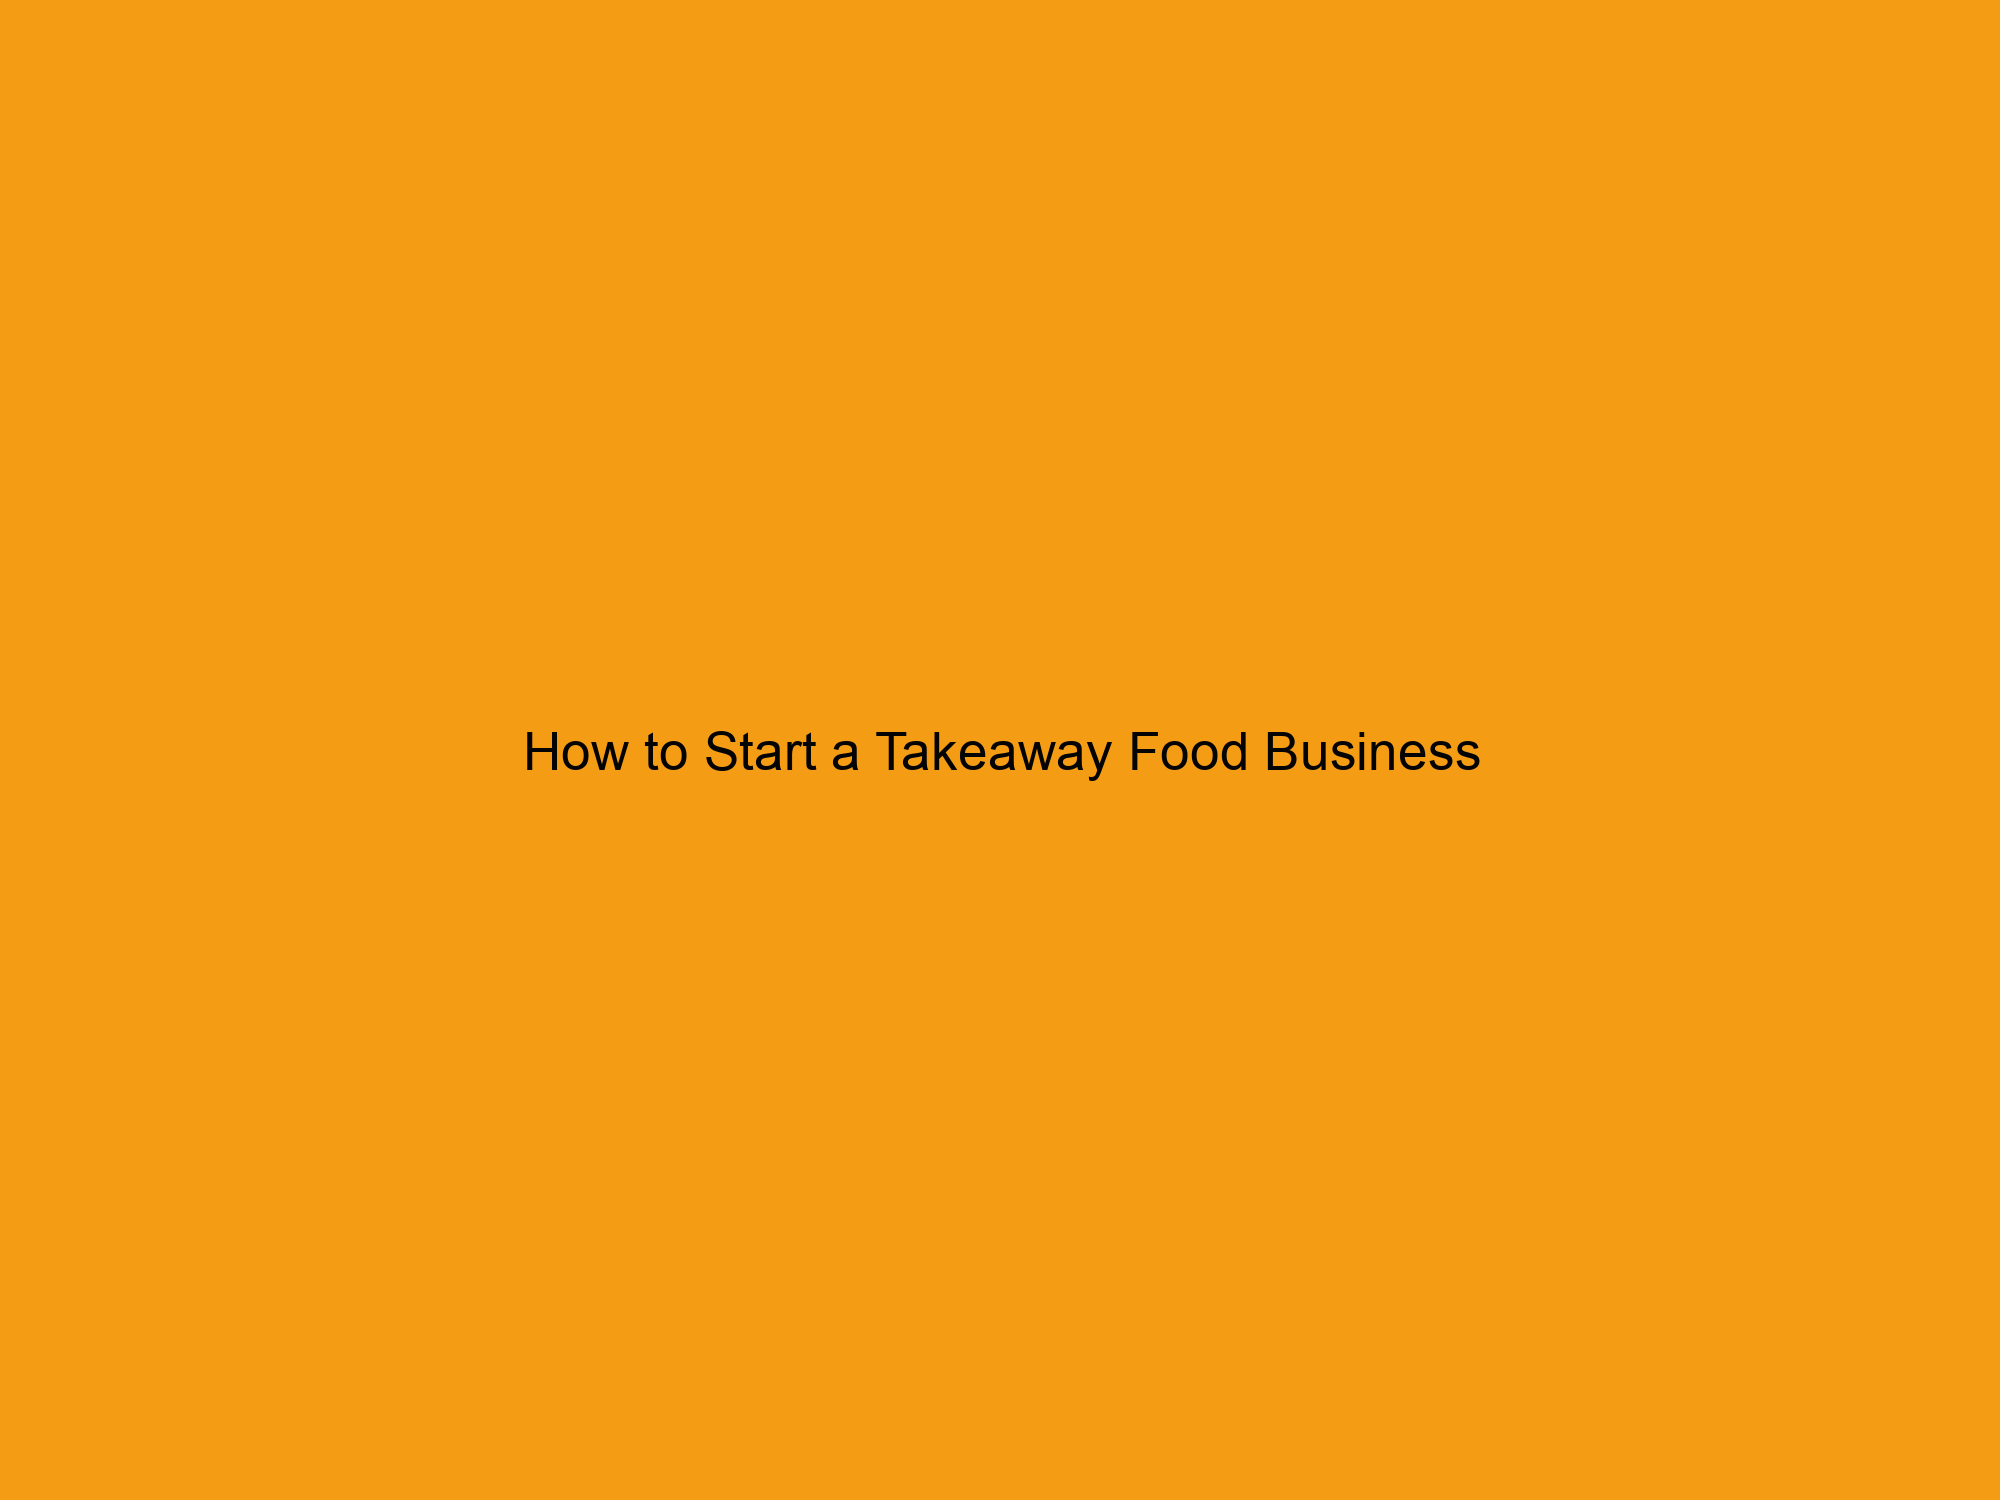 How to Start a Takeaway Food Business